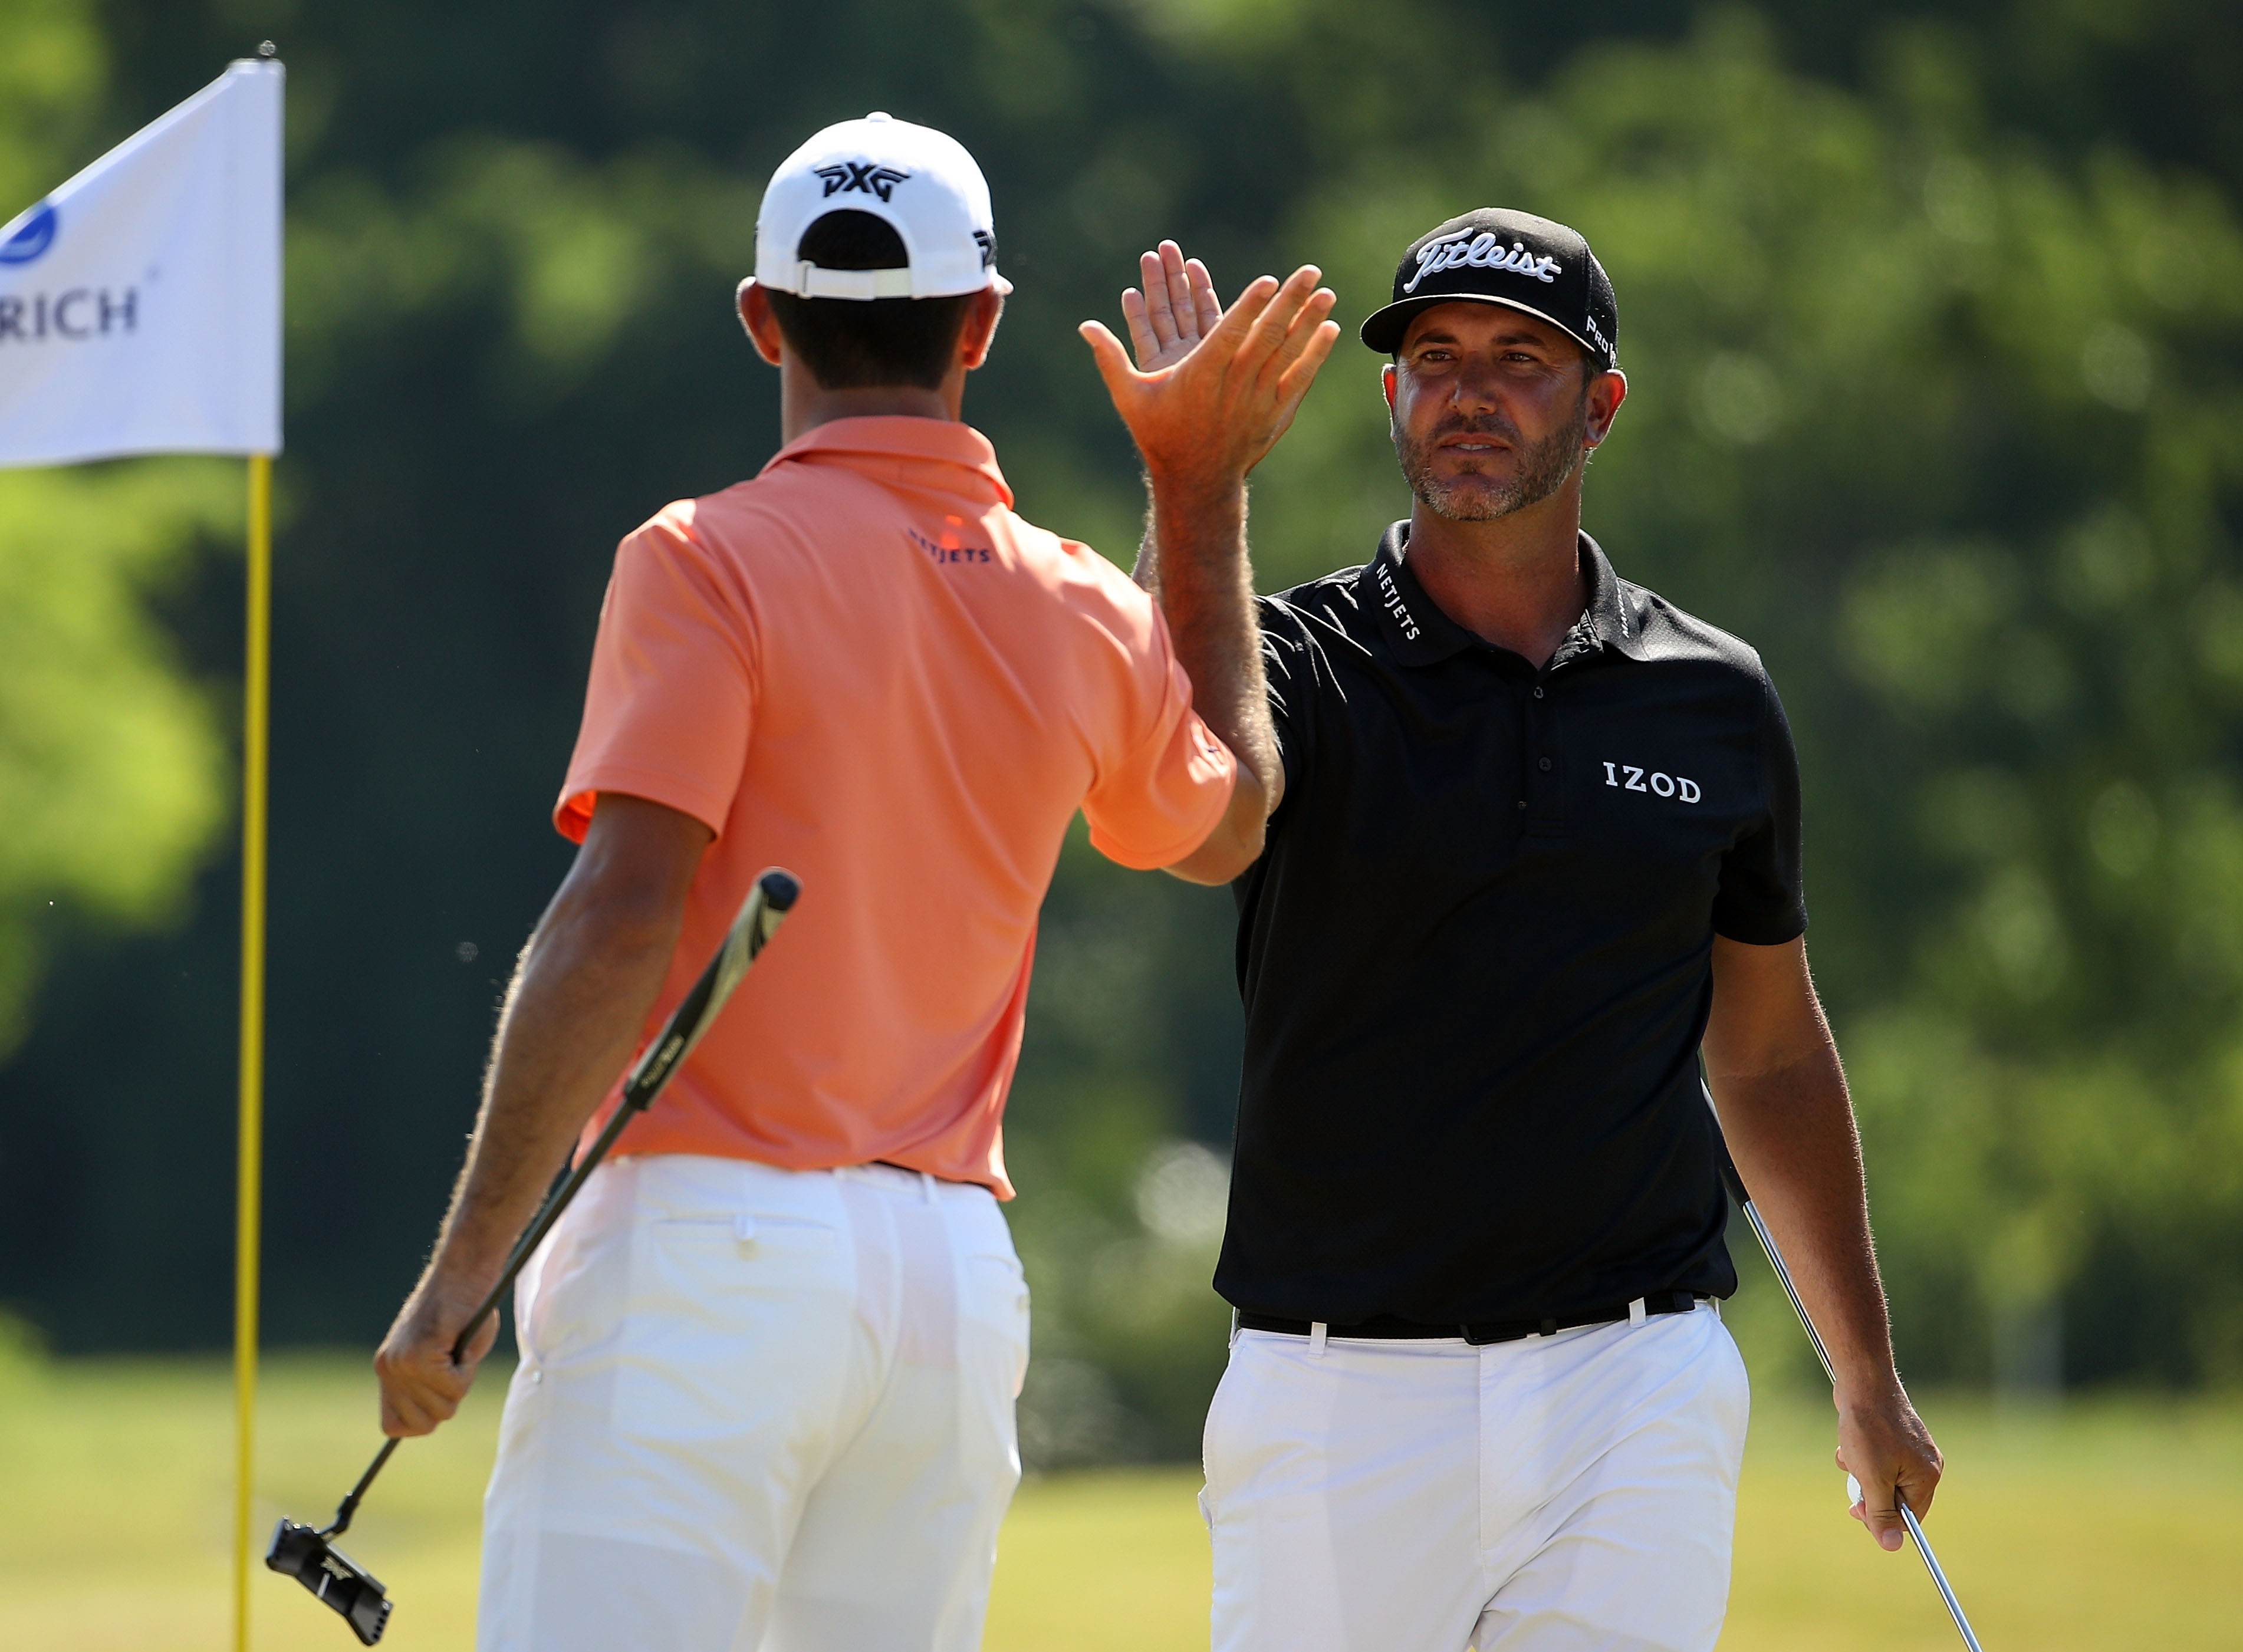 Zurich Classic Of New Orleans - Final Round Getty Images